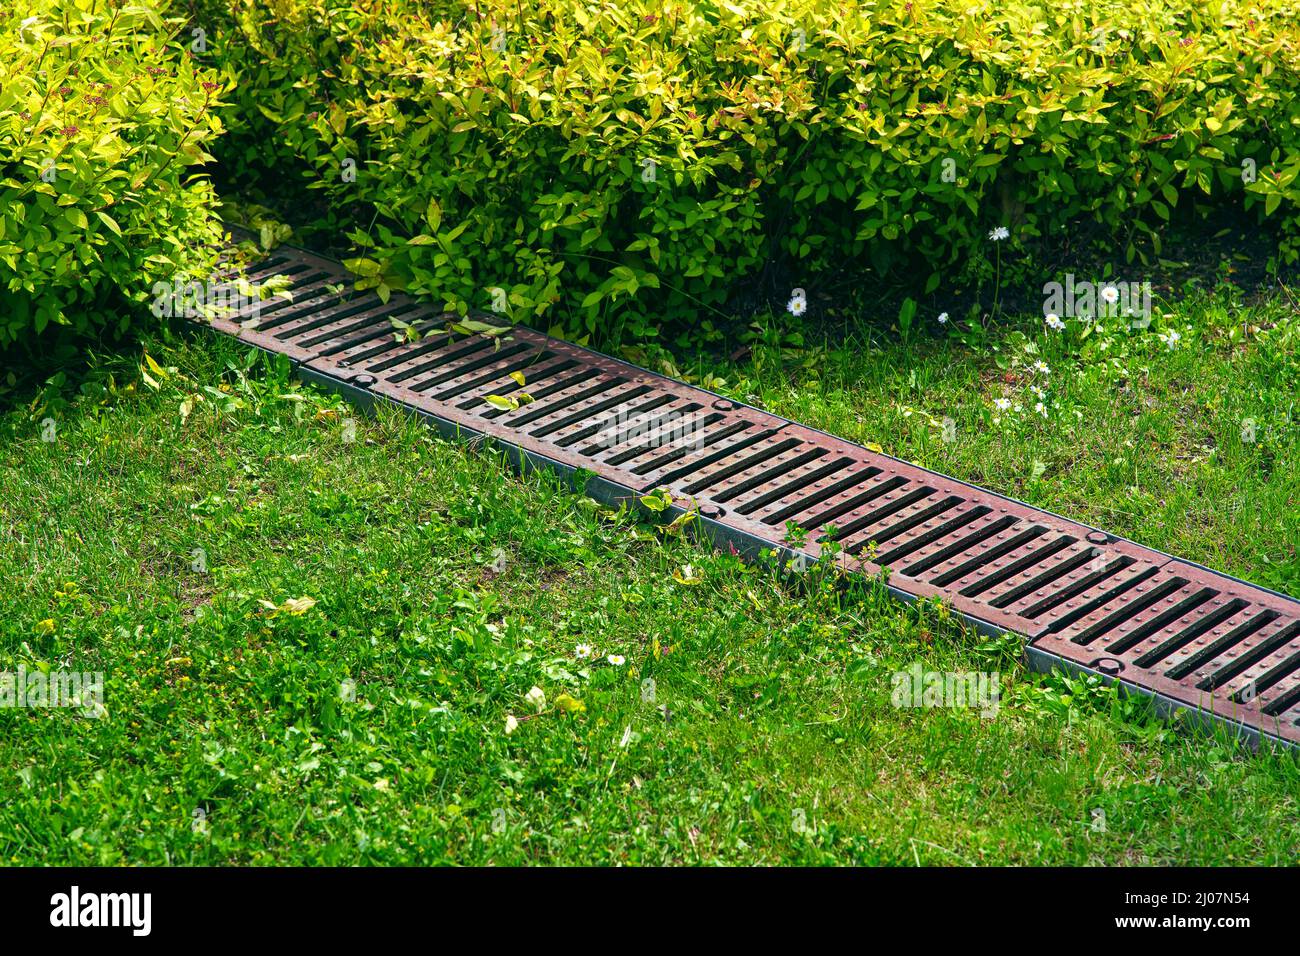 rusty grate drainage system on turf lawn with green grass and foliage bushes in the backyard garden, rainwater drainage system in the park among the p Stock Photo